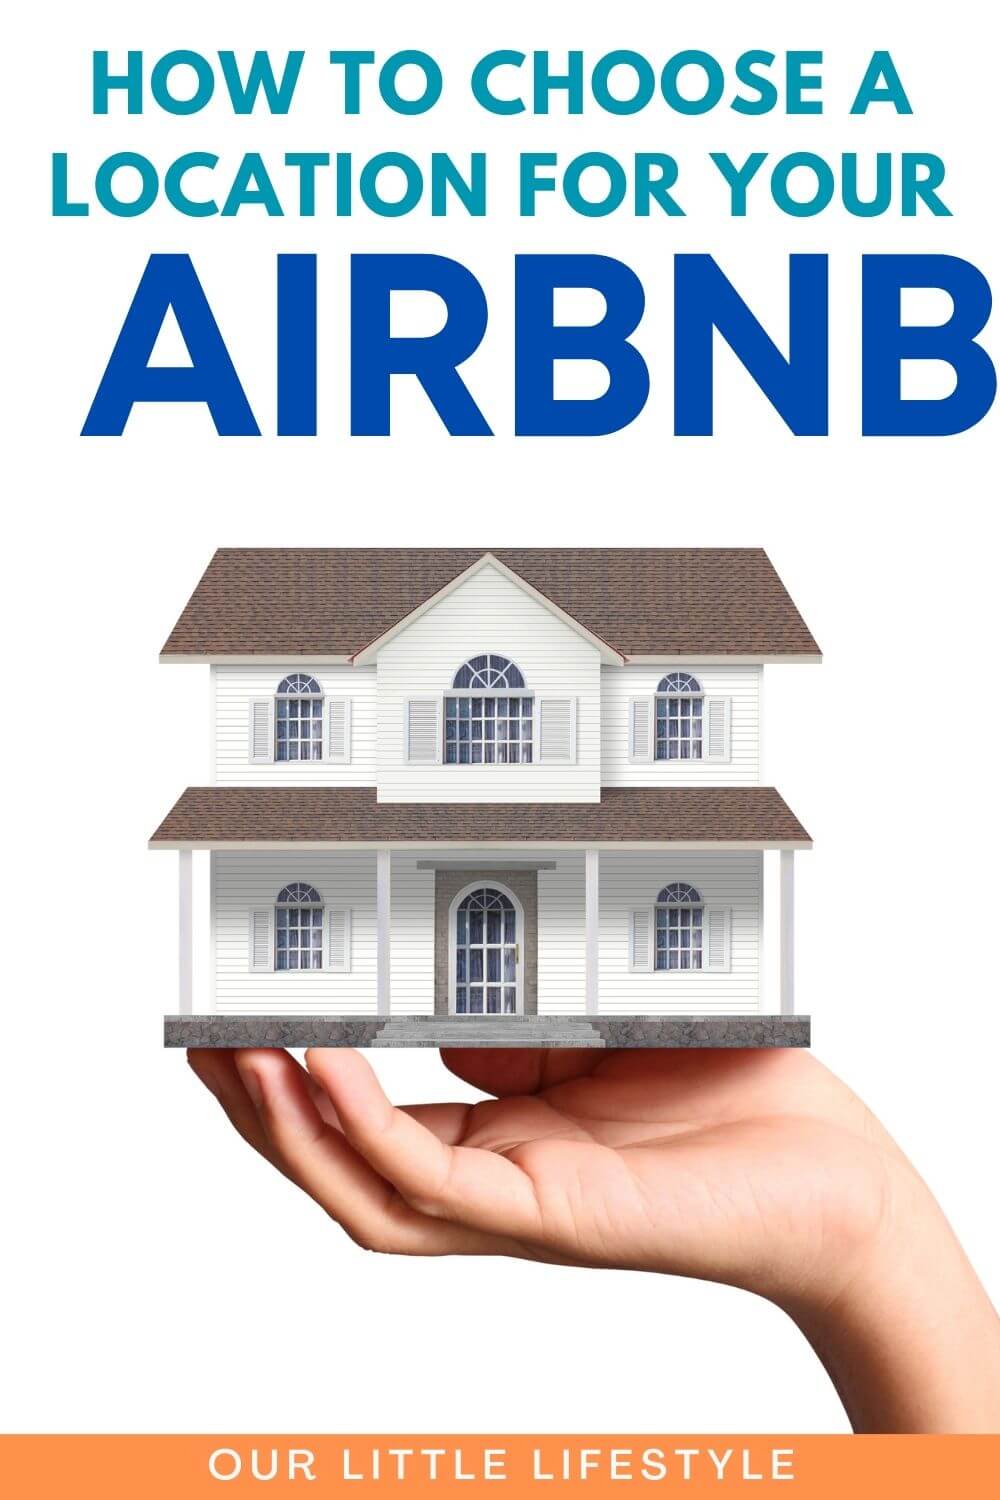 Choosing a location for your first Airbnb